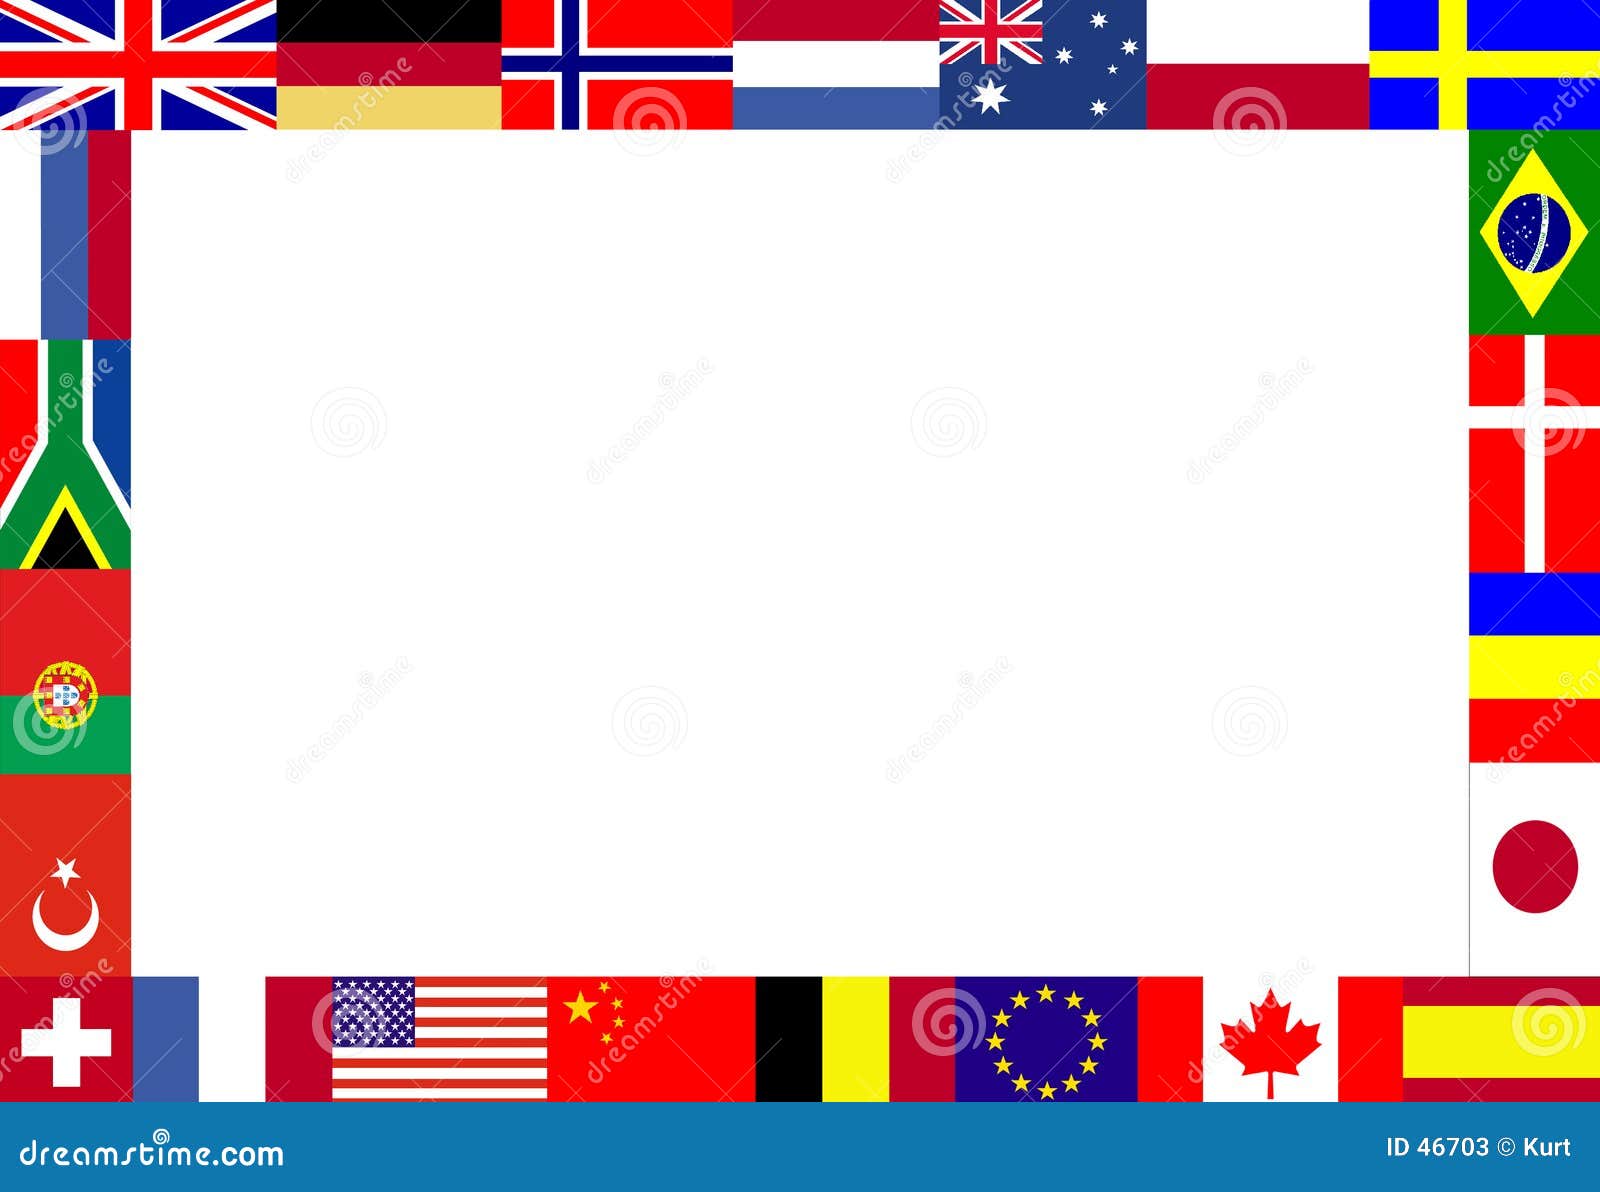 clip art flags of the world free - photo #38